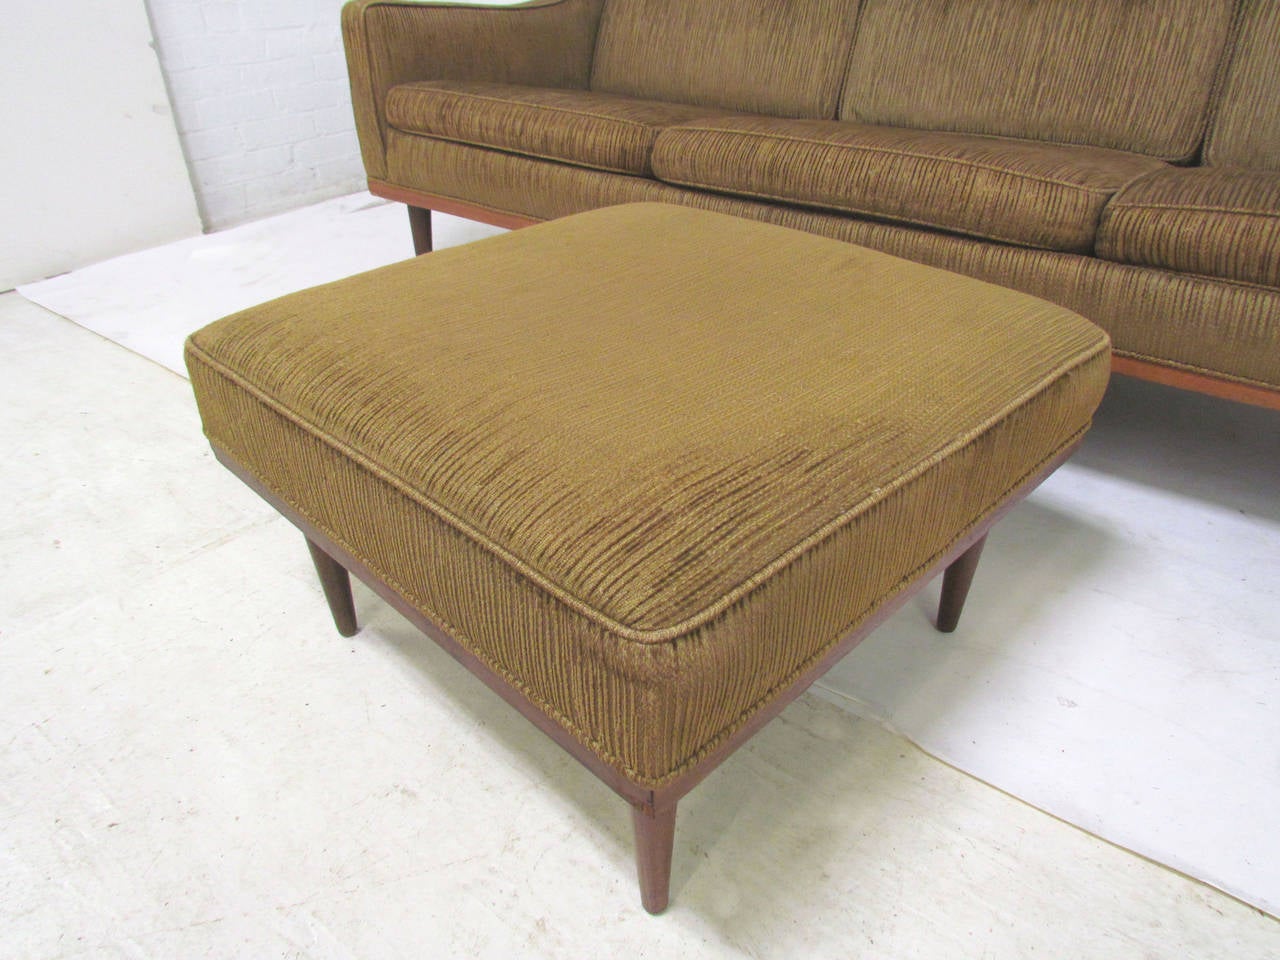 Upholstery Midcentury Articulate Sofa with Ottoman by Milo Baughman for James Inc.